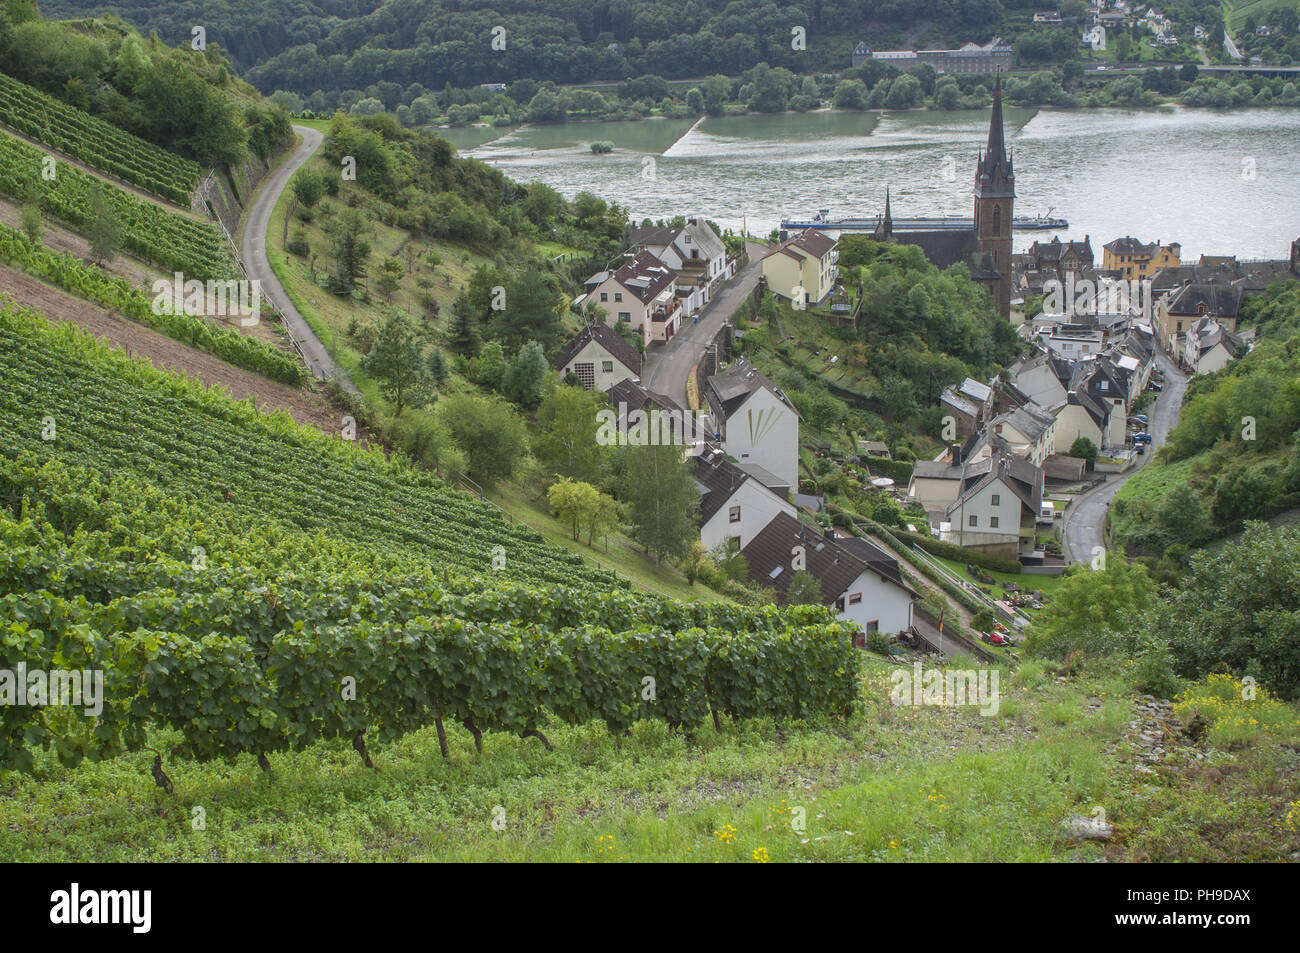 Lorchhausen in the Middle-Rhine Valley, Germany Stock Photo